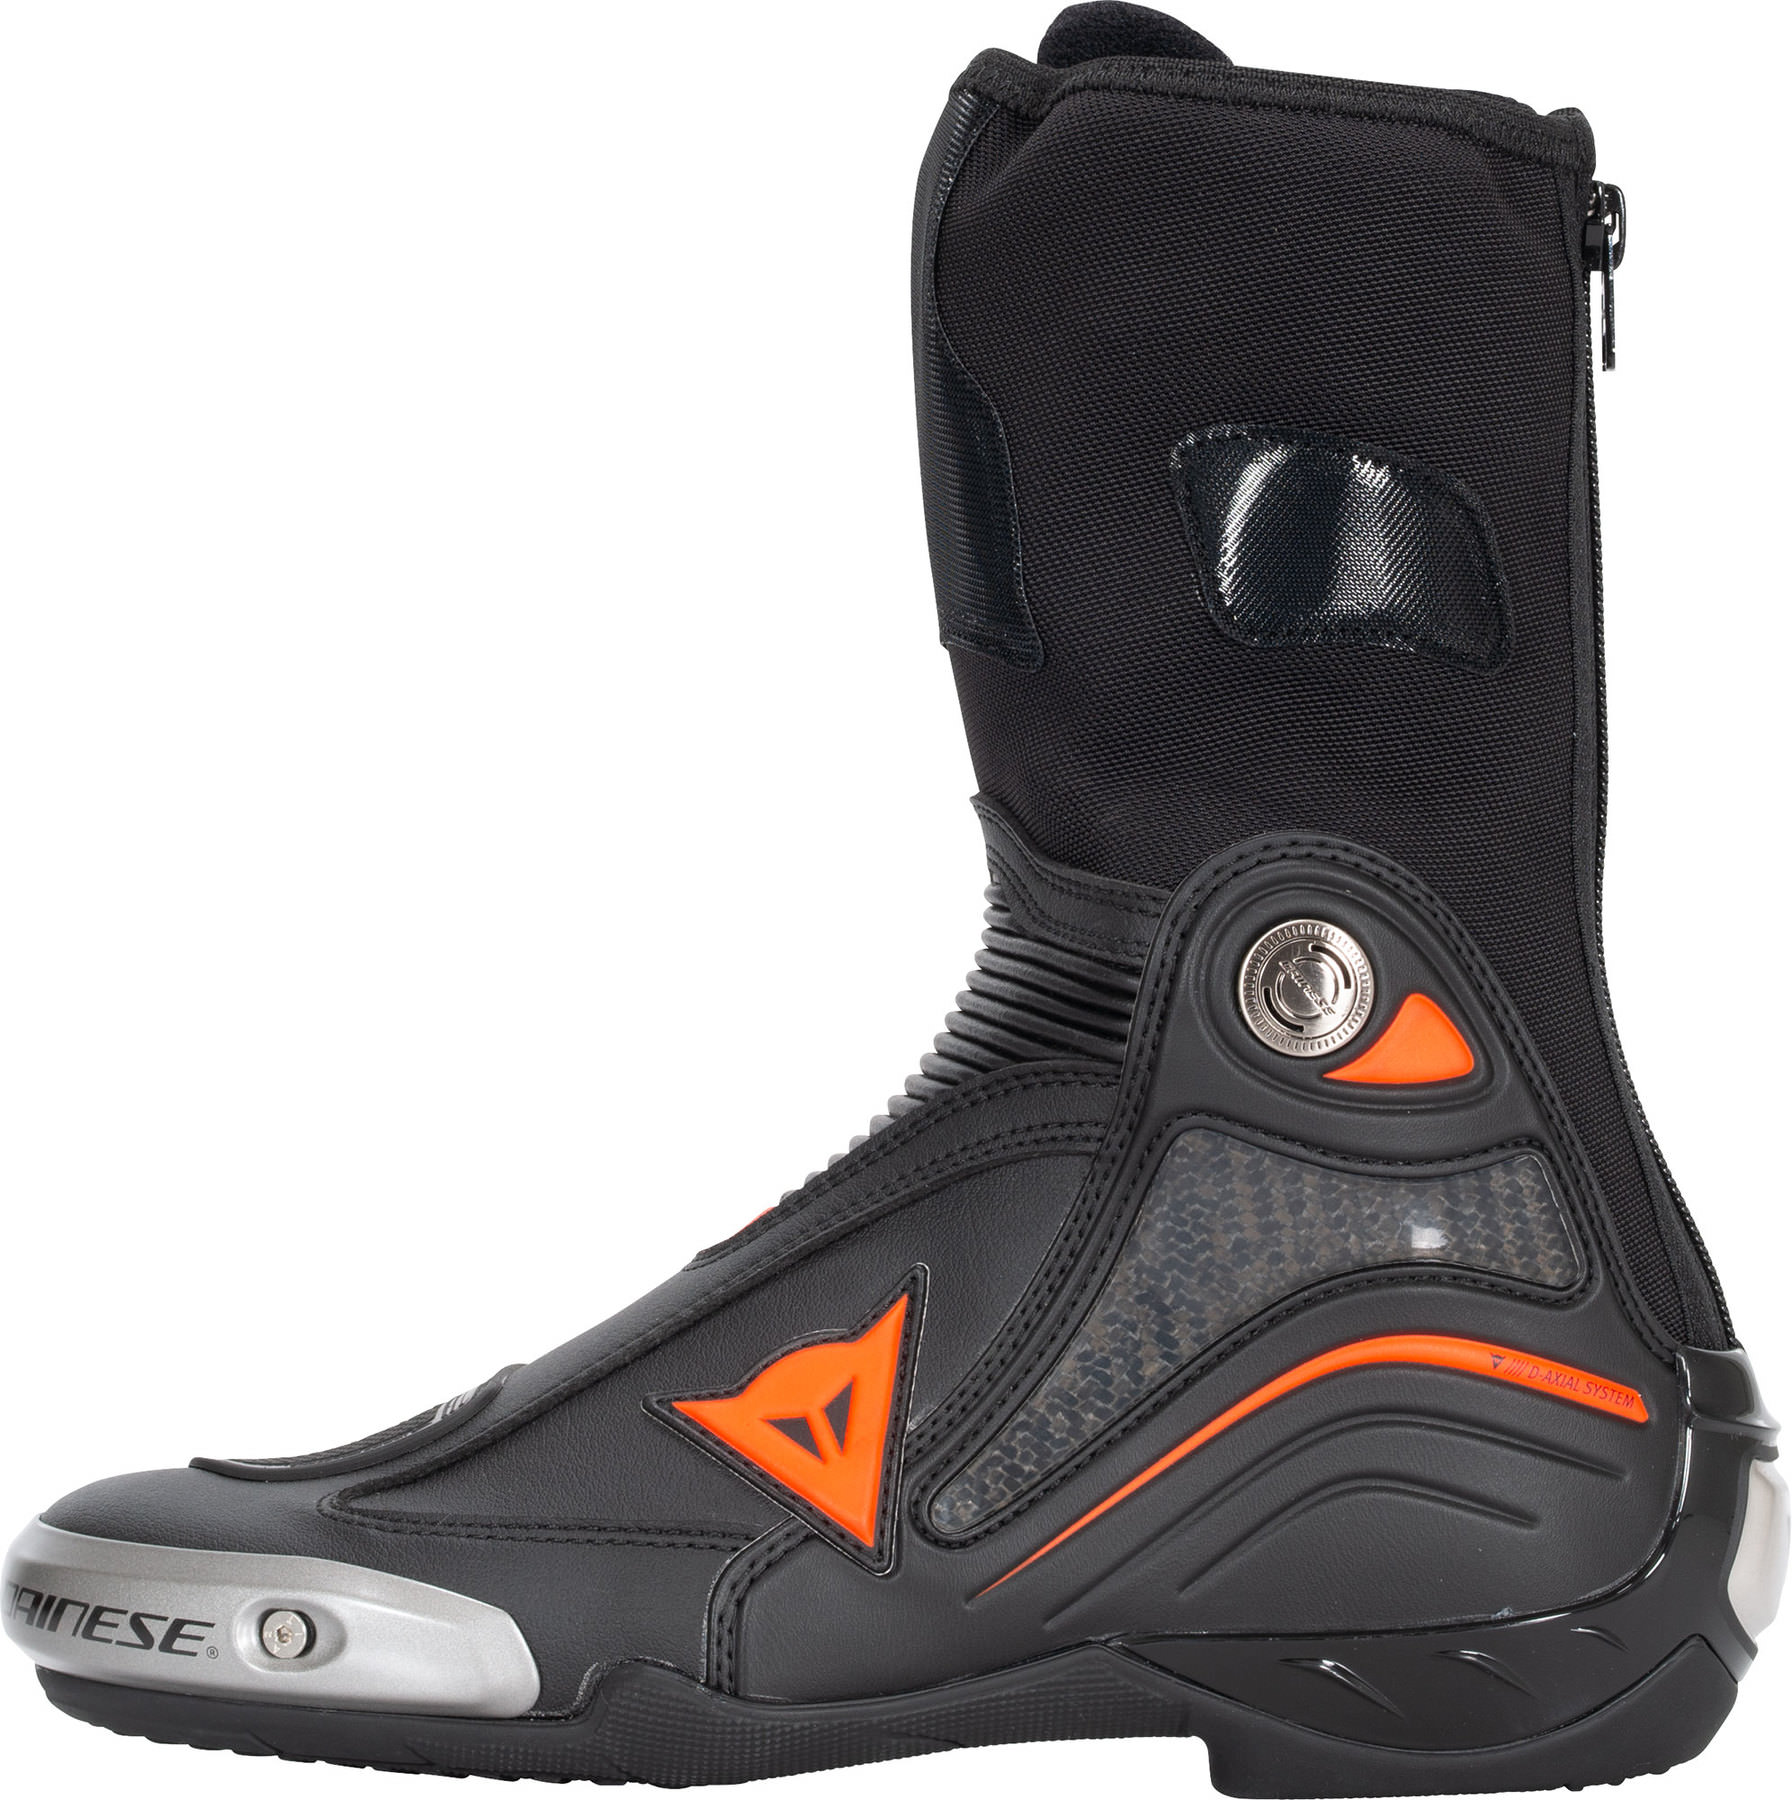 Buy Dainese Axial D1 boot | Louis 